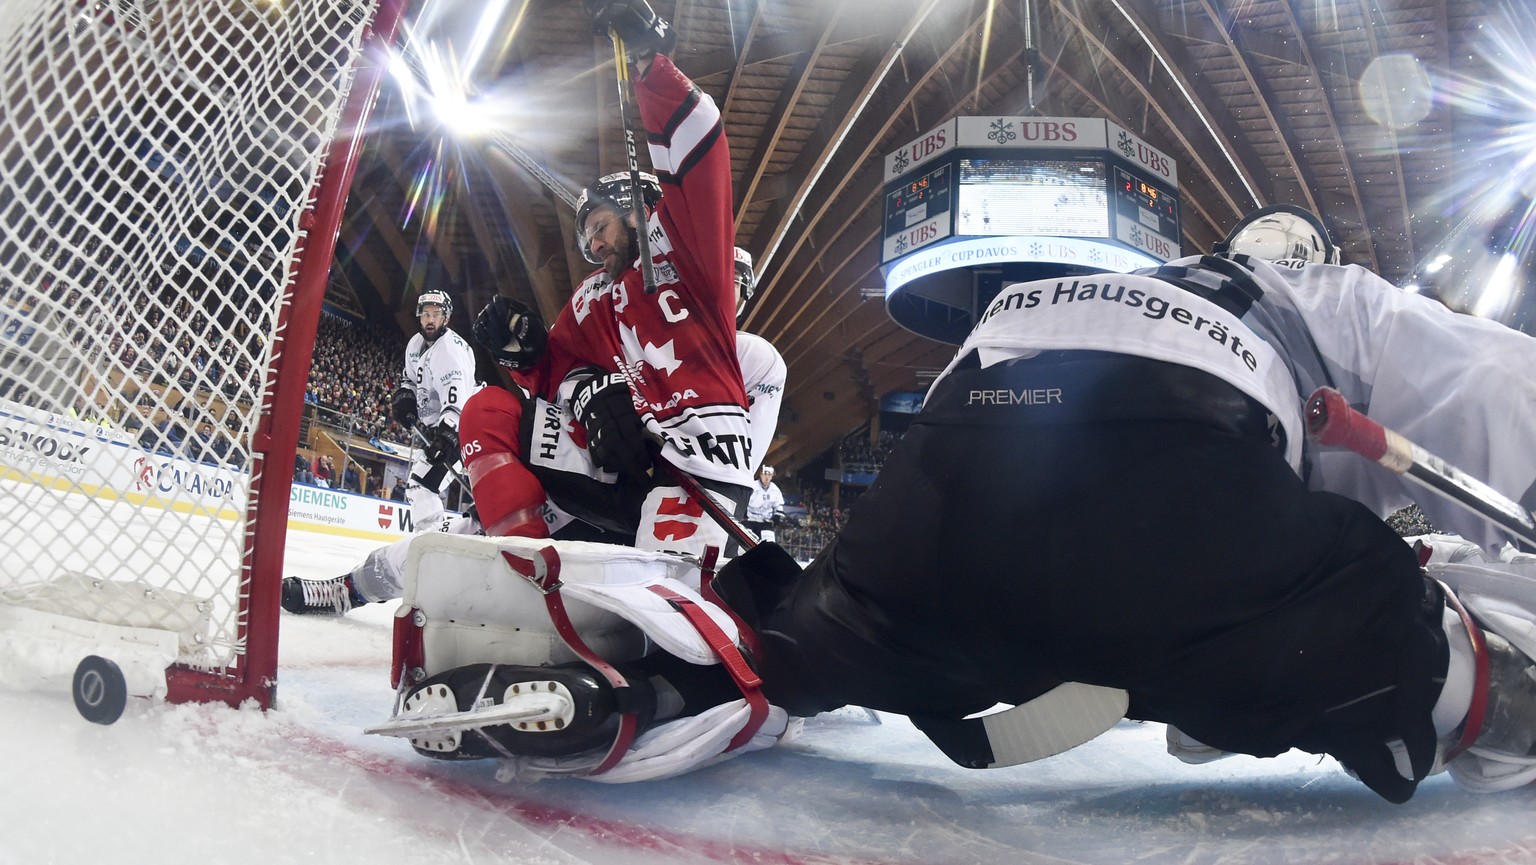 Team Canada&#039;s Andrew Ebbet scores 3-1 versus Ice Tigers`s goalkeeper Andreas Jenik during the game between Team Canada and Thomas Sabo Ice Tigers at the 92th Spengler Cup ice hockey tournament in ...